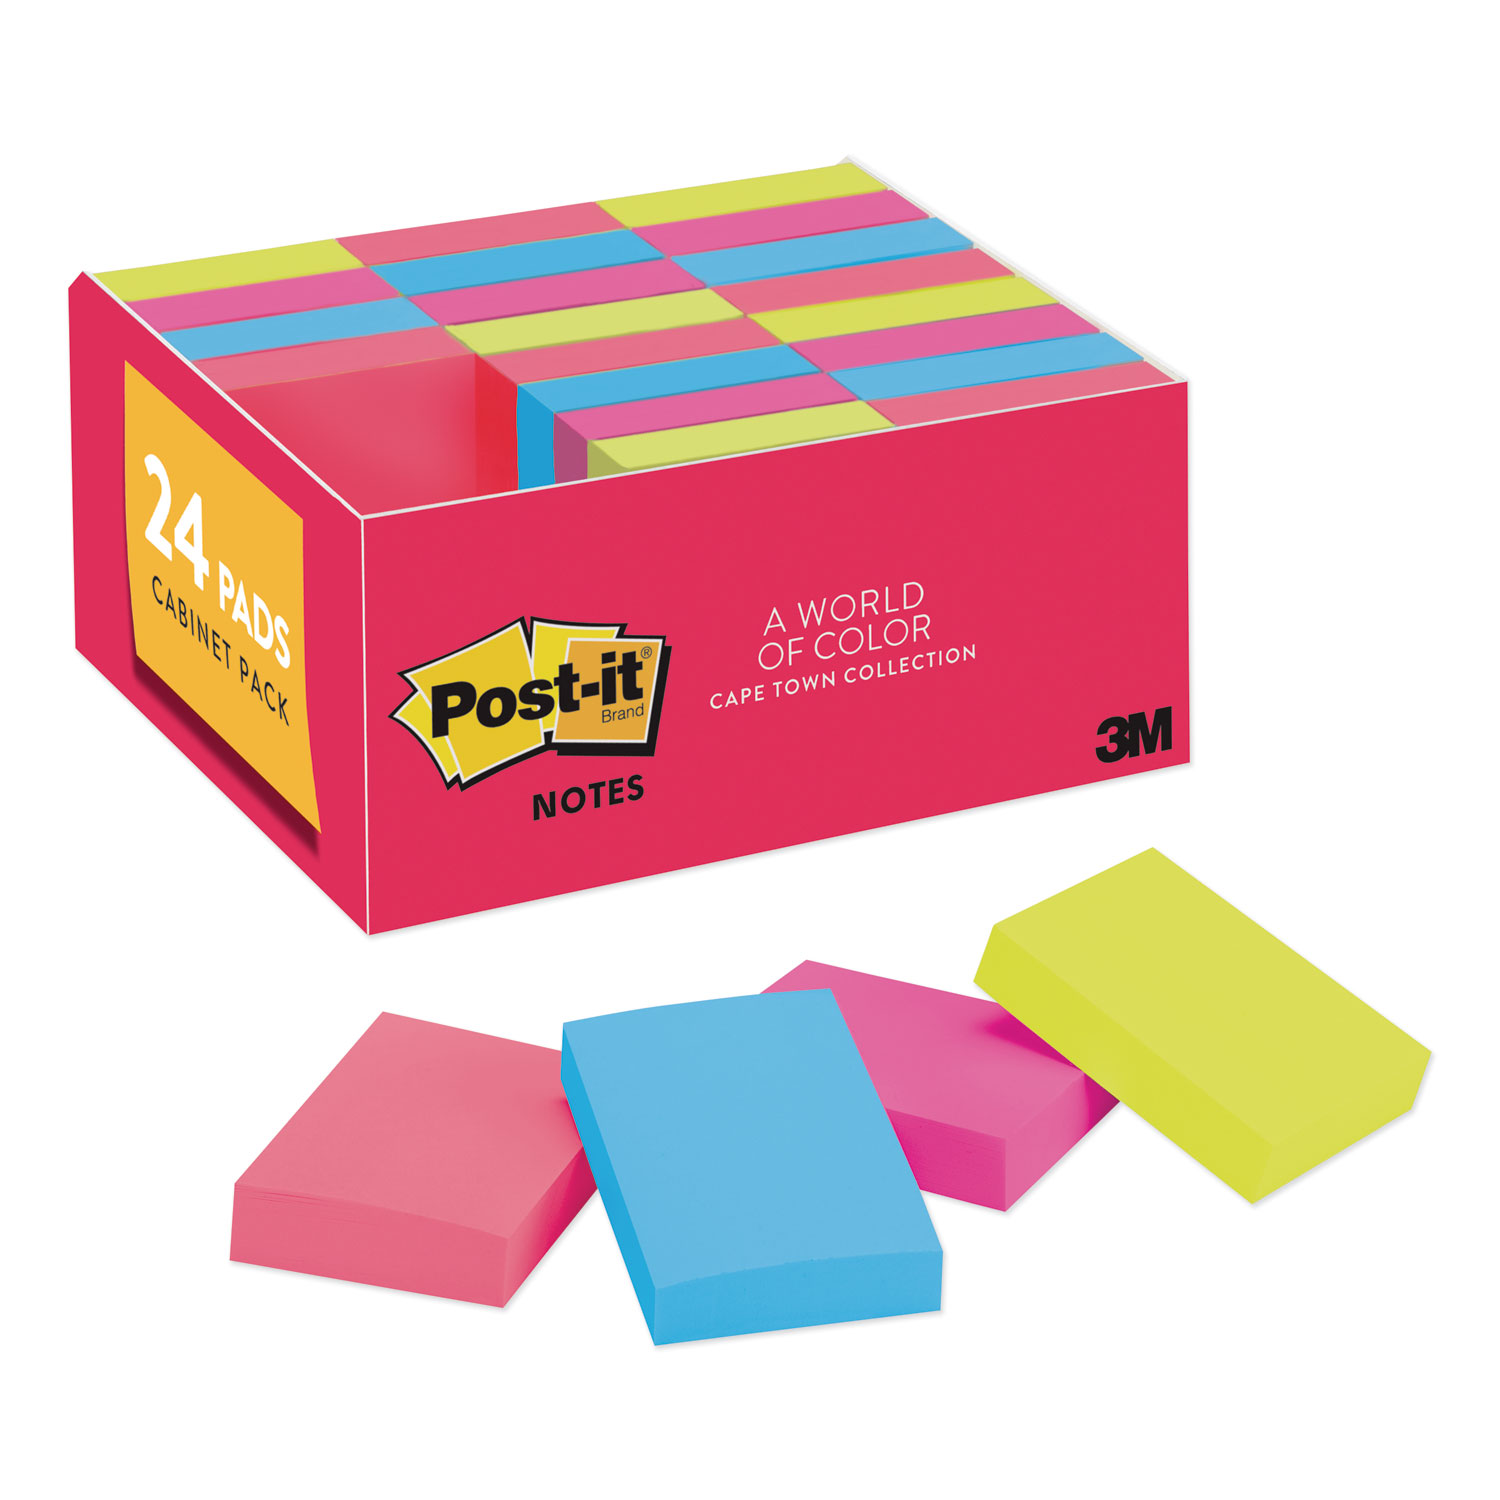  Post-it Notes 65324ANVAD Original Pads in Cape Town Colors, 1 3/8 x 1 7/8, Plain, 100-Sheet, 24/Pack (MMM65324ANVAD) 